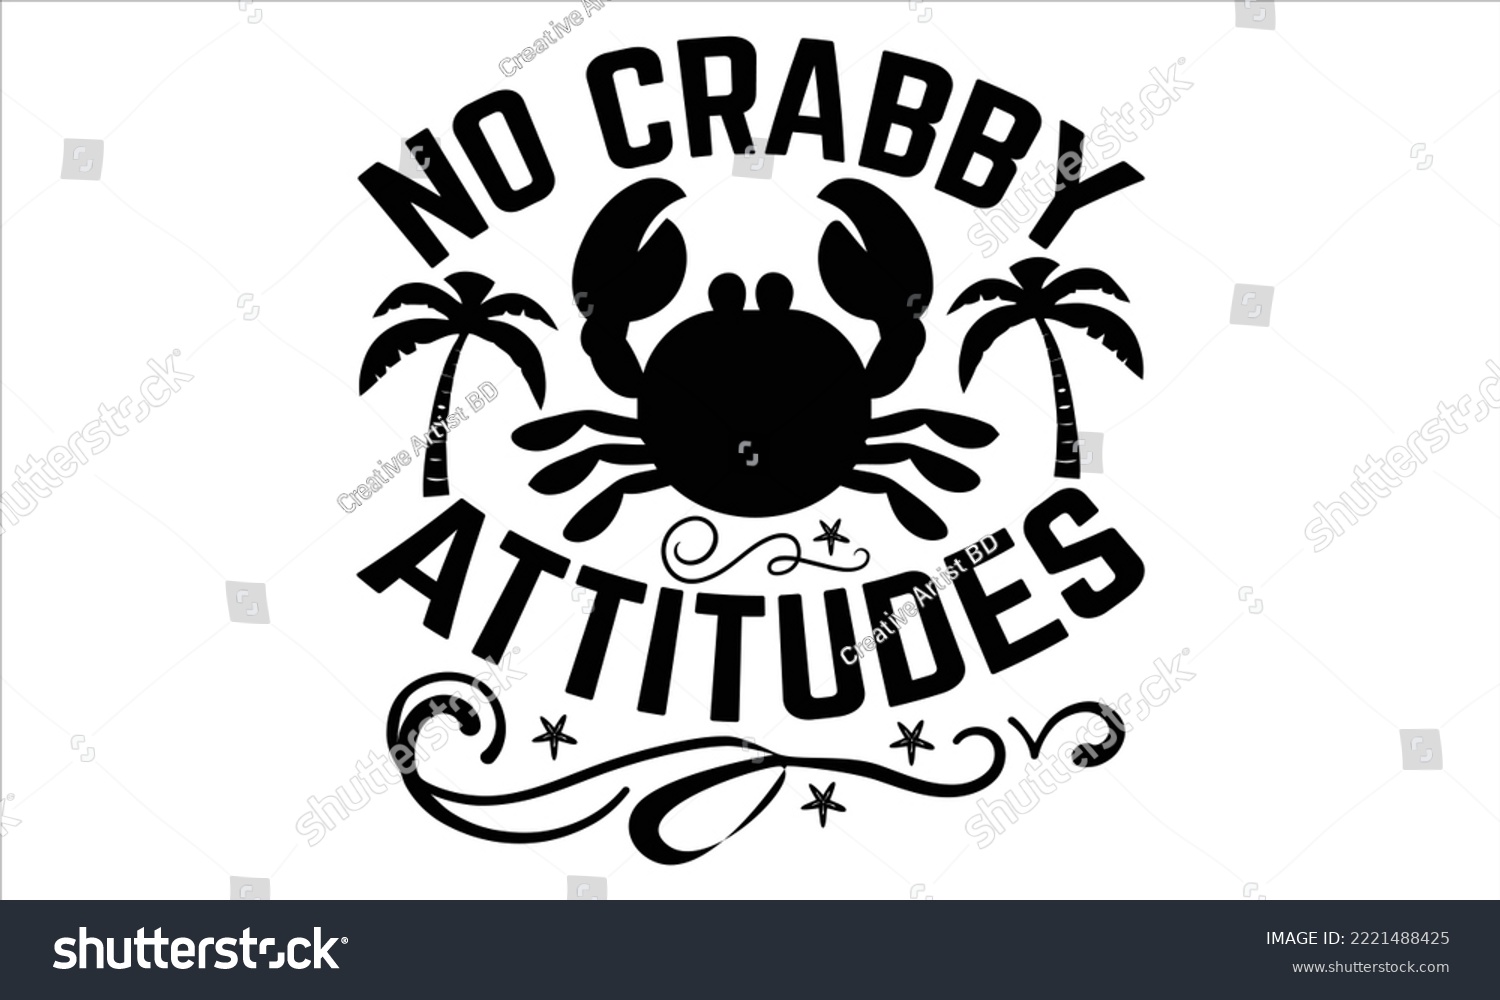 SVG of No crabby attitudes - Summer T shirt Design, Hand drawn lettering and calligraphy, Svg Files for Cricut, Instant Download, Illustration for prints on bags, posters svg